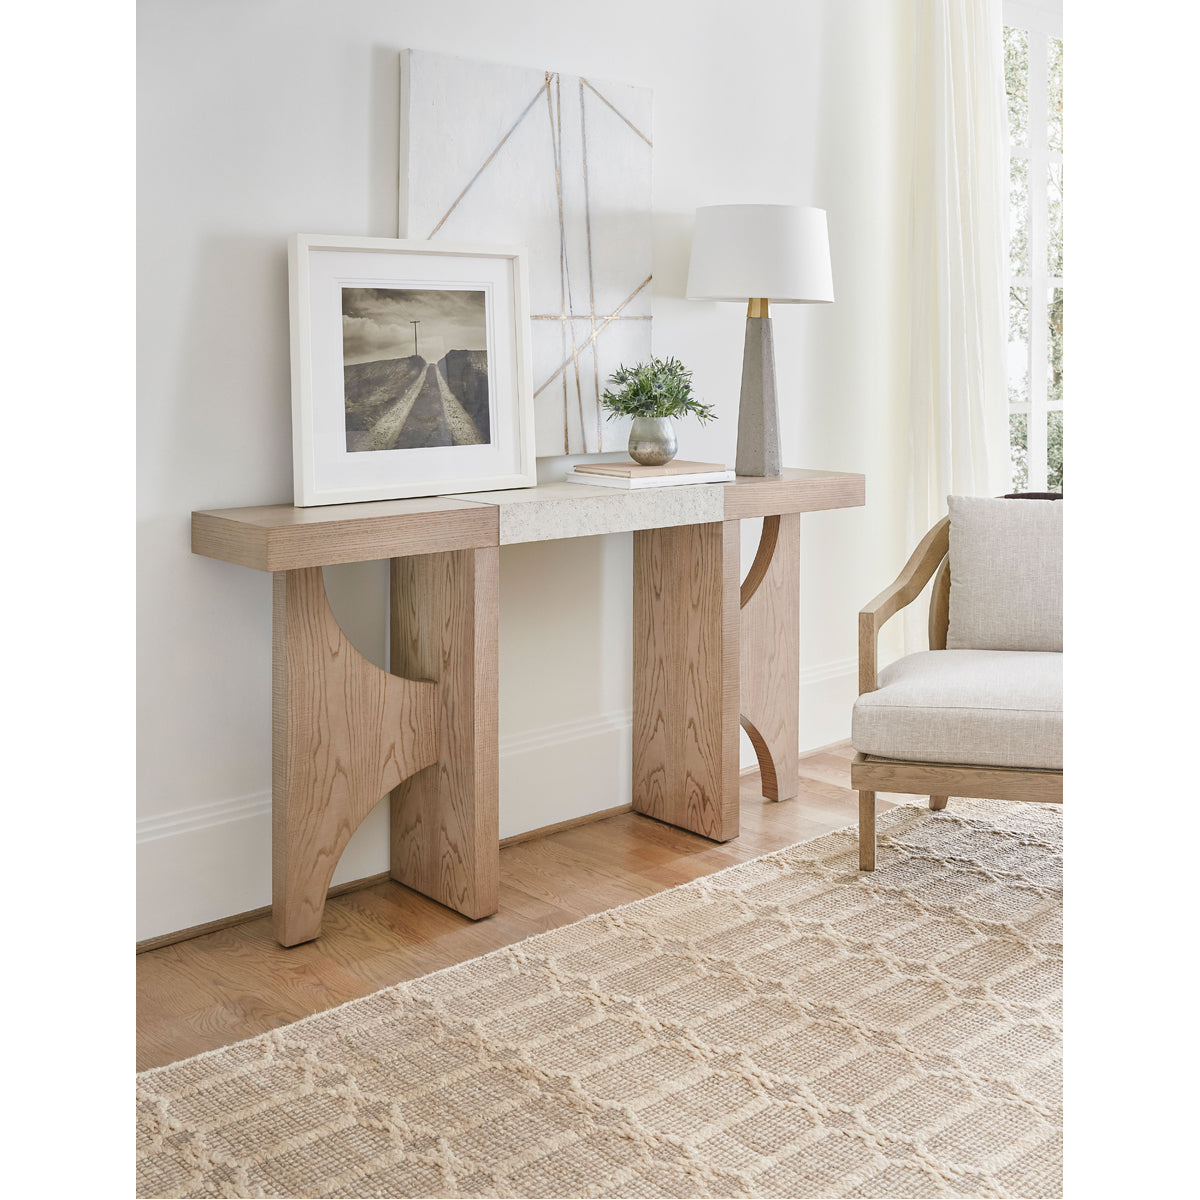 Theodore Alexander Catalina Console Table